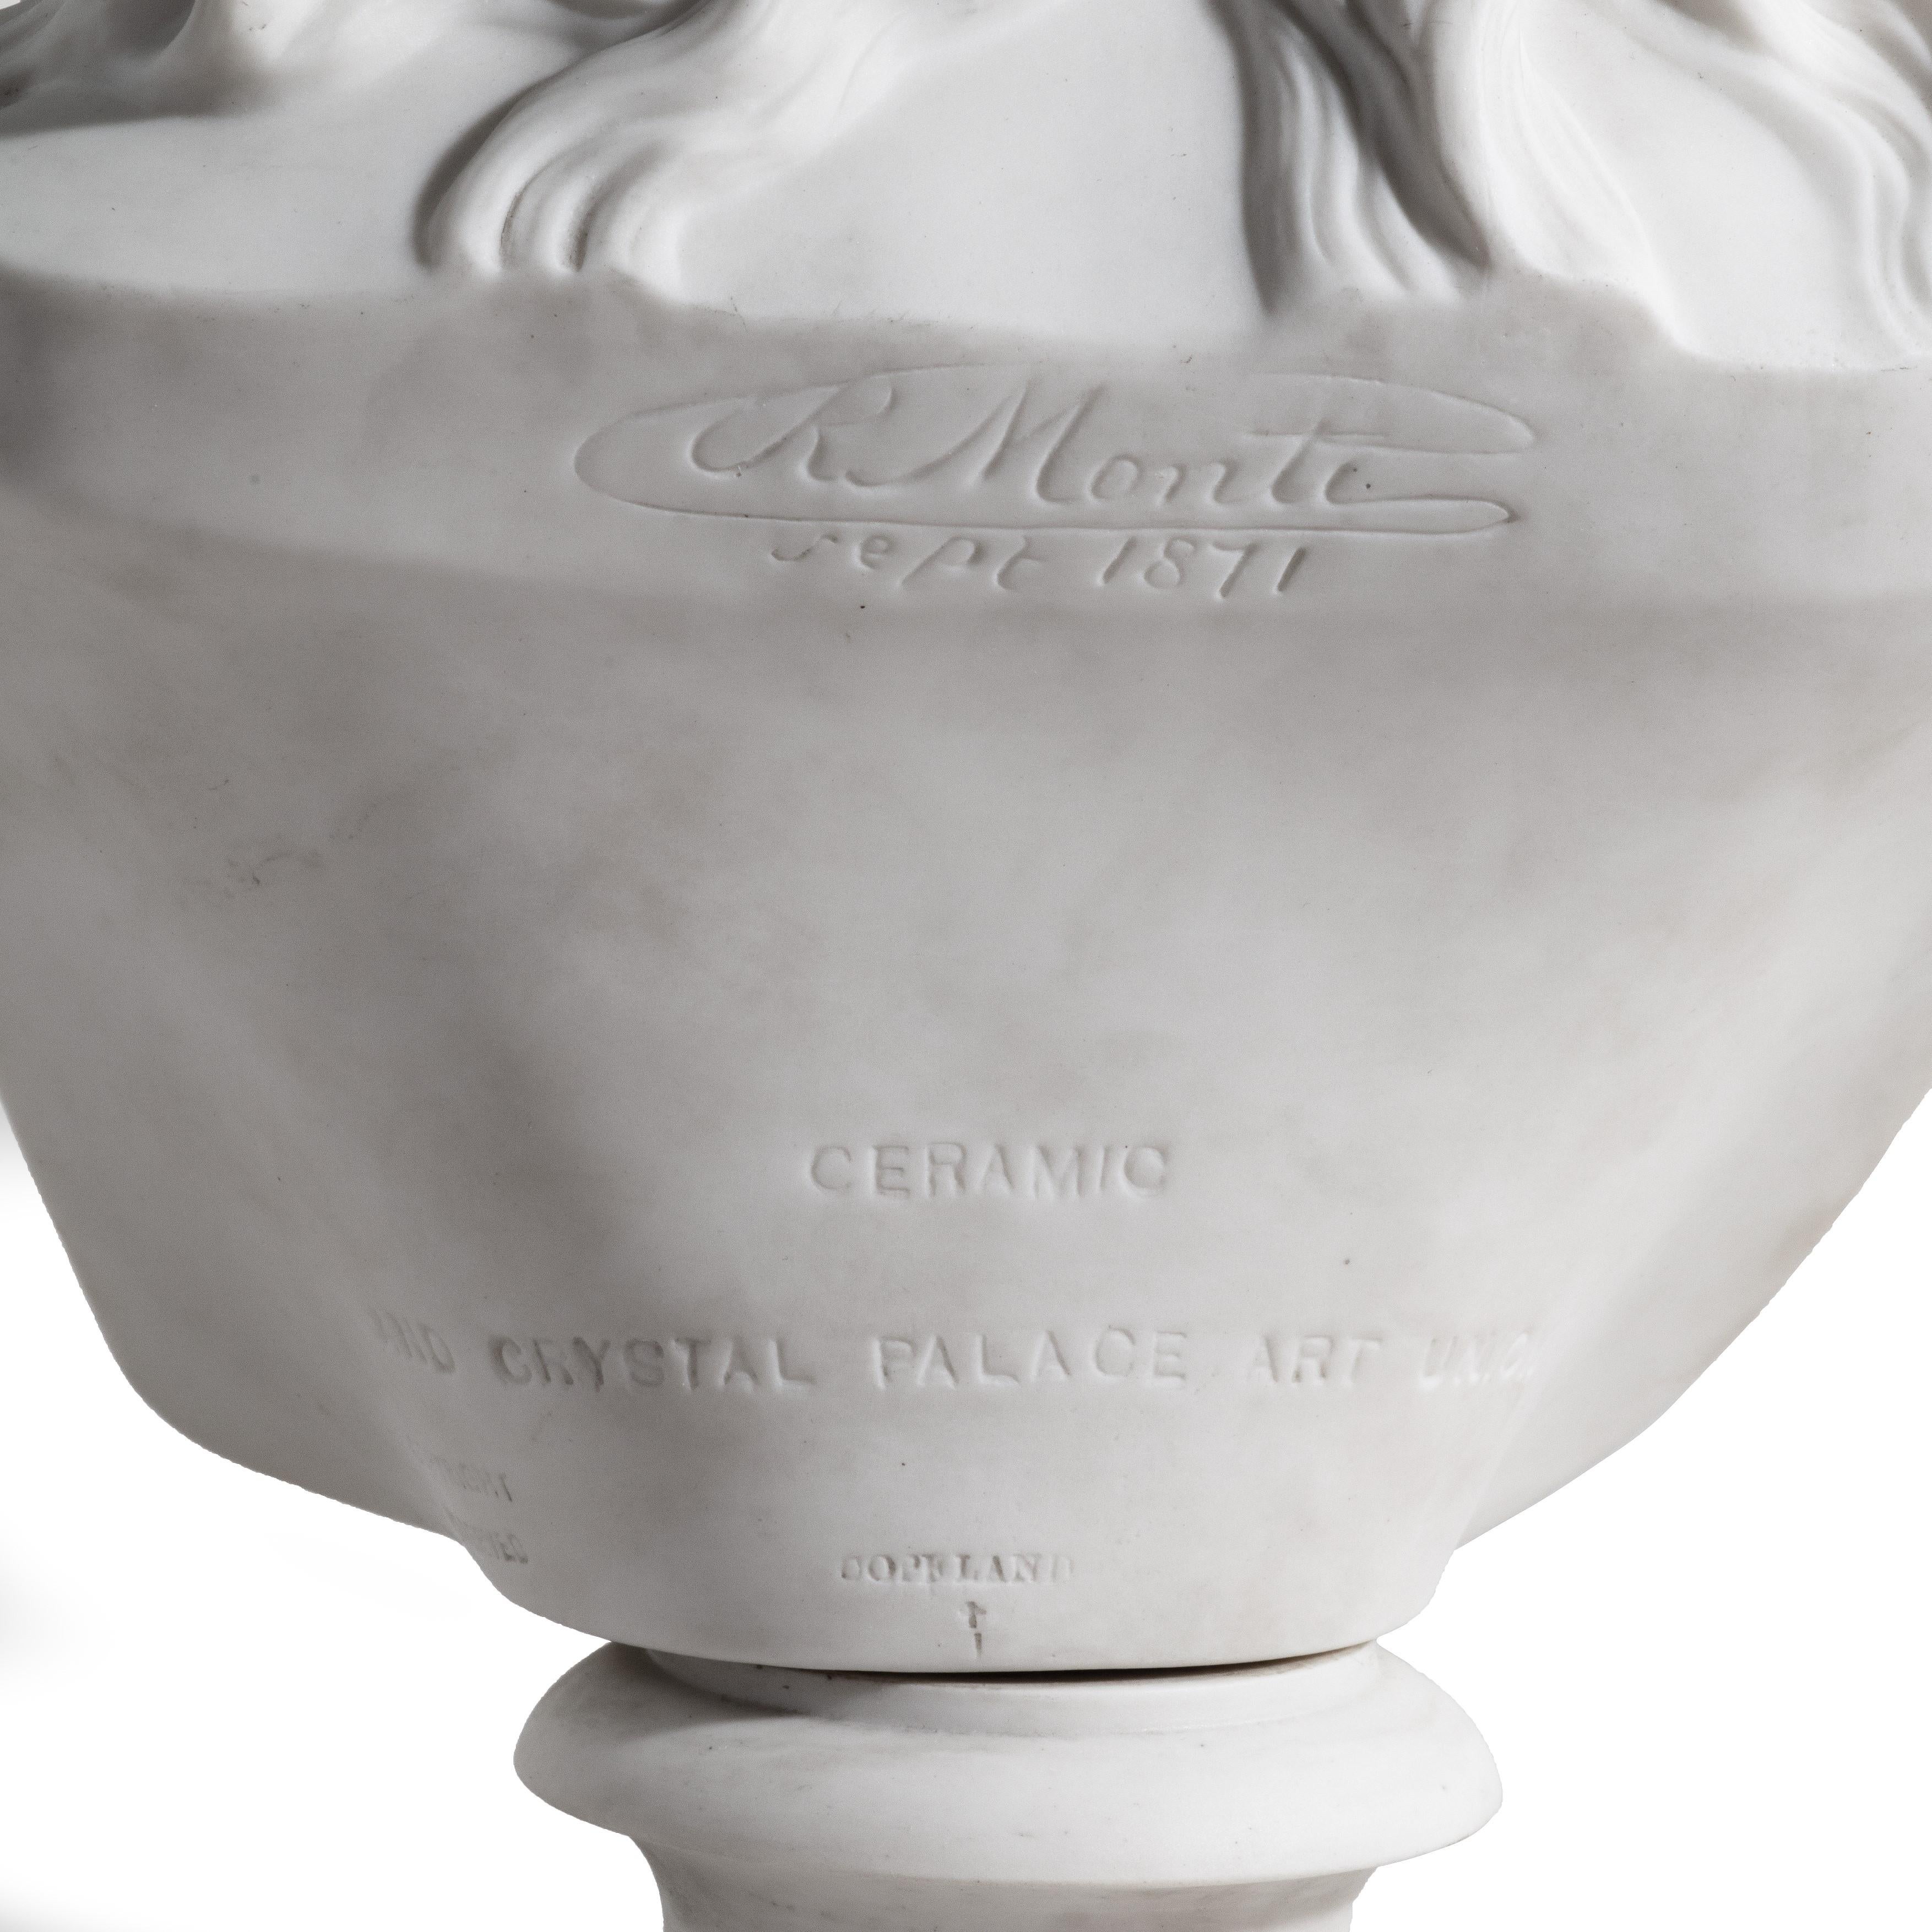 English Copeland Parian Ware Bust of “Love” by Raffaelle Monti, Dated 1871